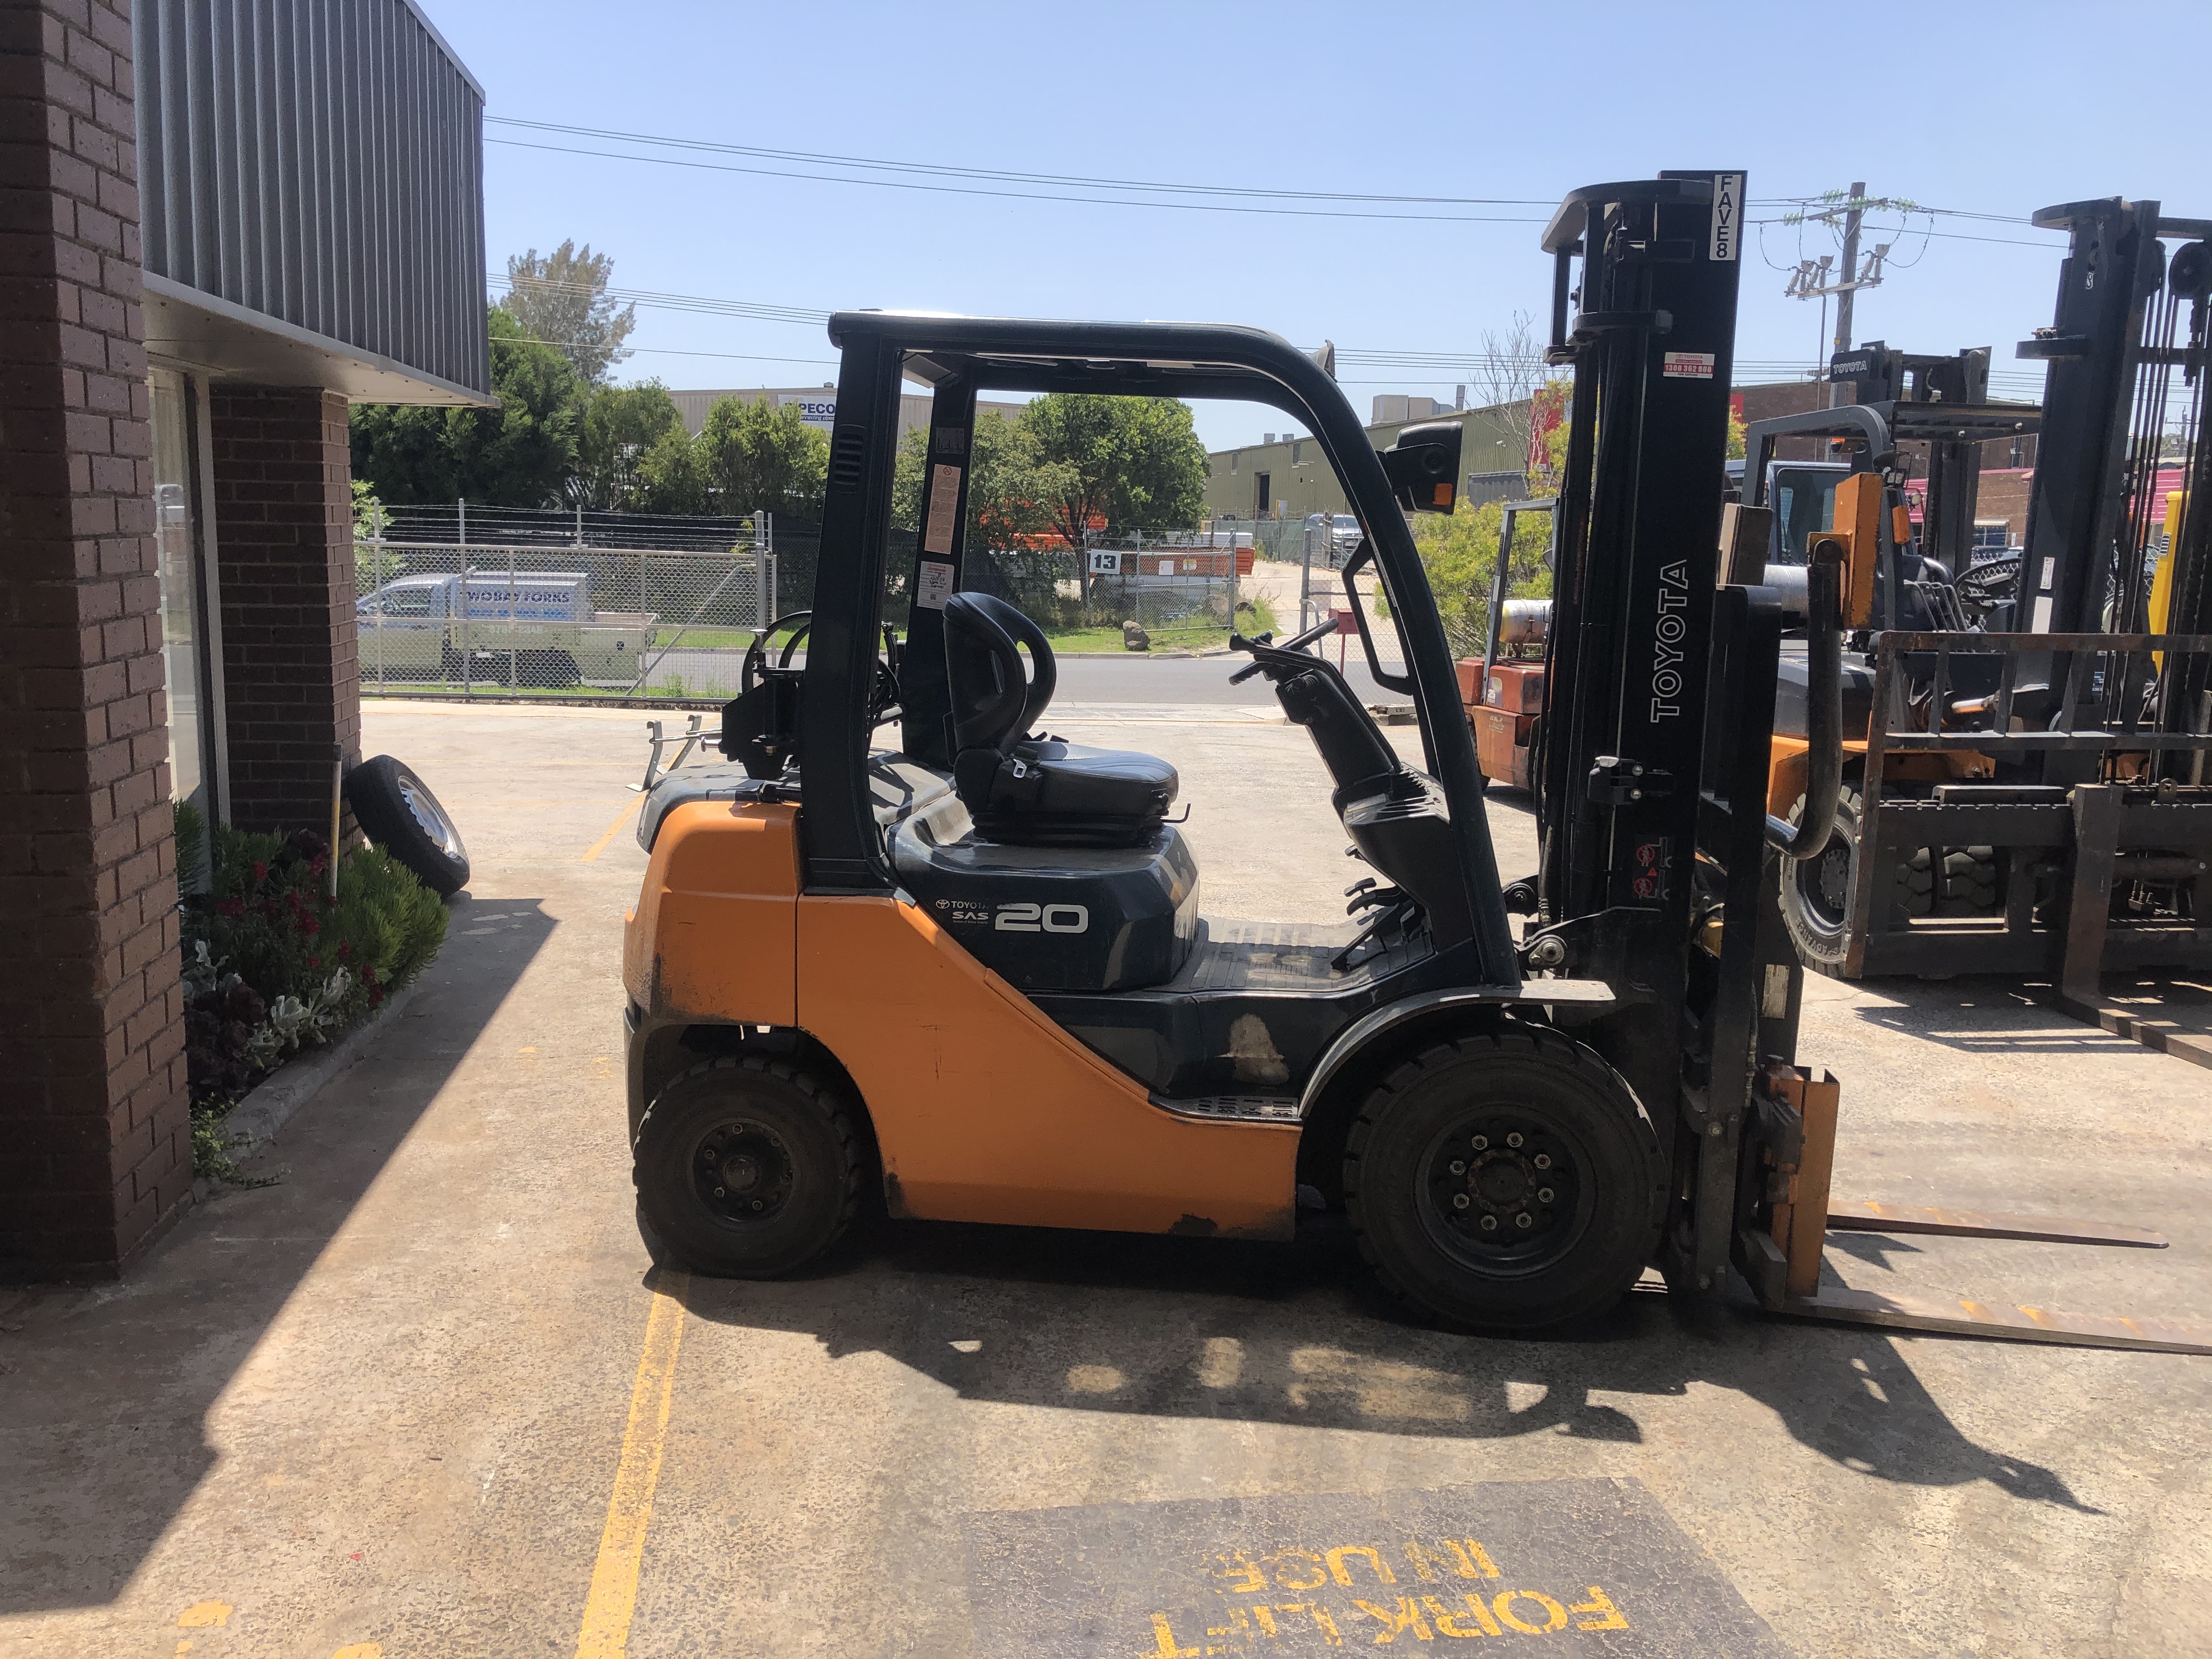 Toyota 32 8fg20 2 Ton With Rotator Hold Down Attachment Forklift Sales Hire Service In Melbourne